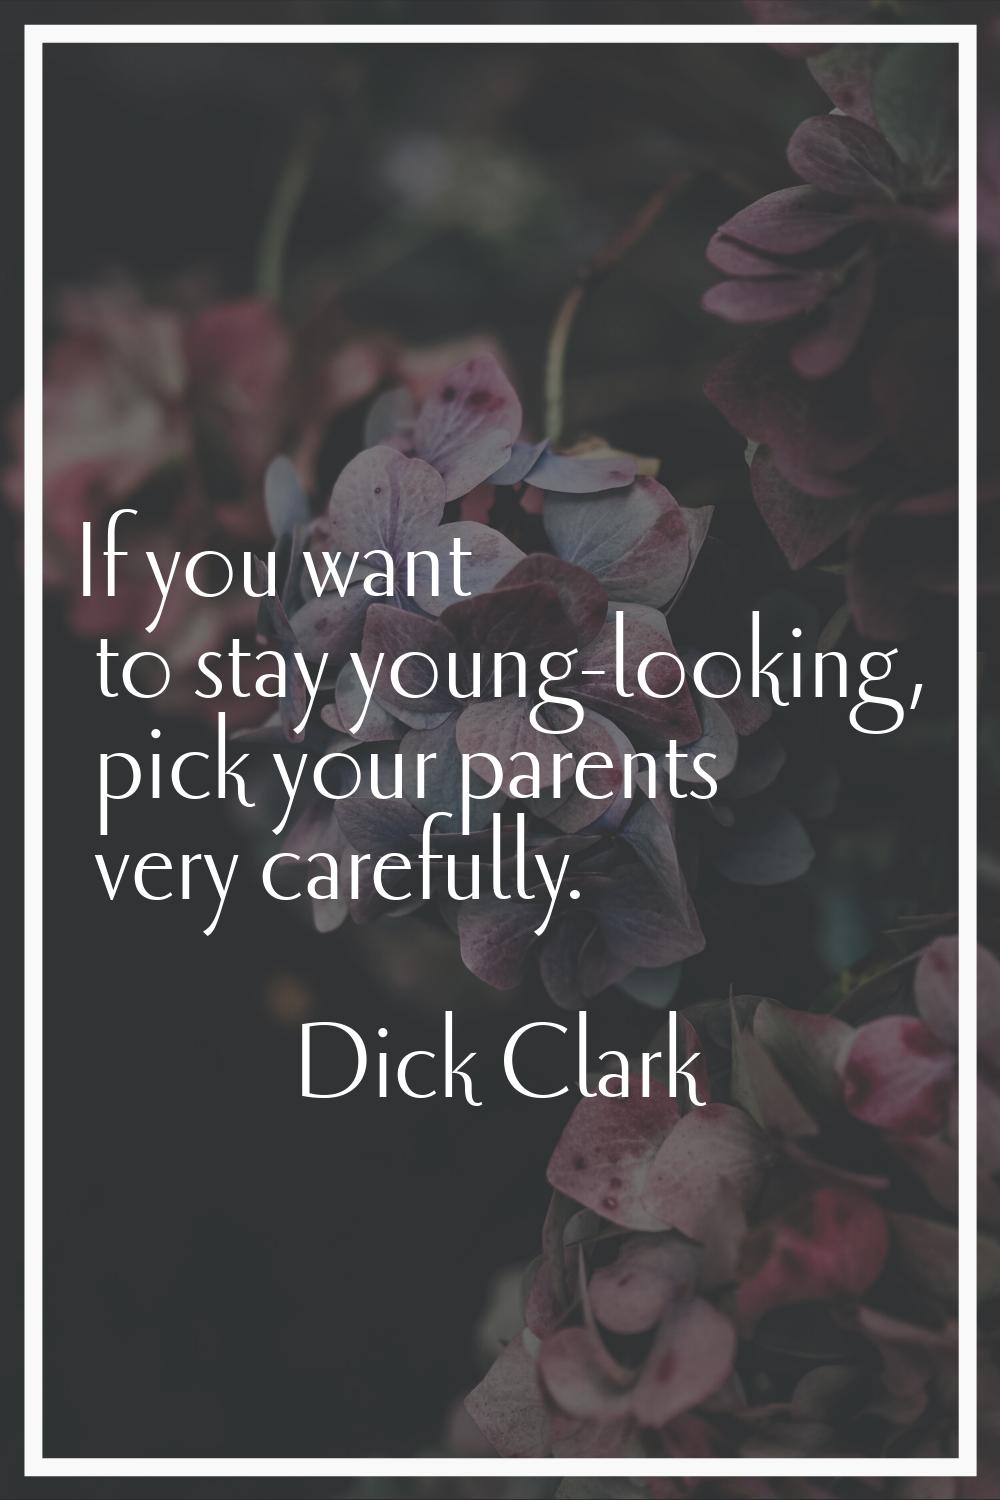 If you want to stay young-looking, pick your parents very carefully.